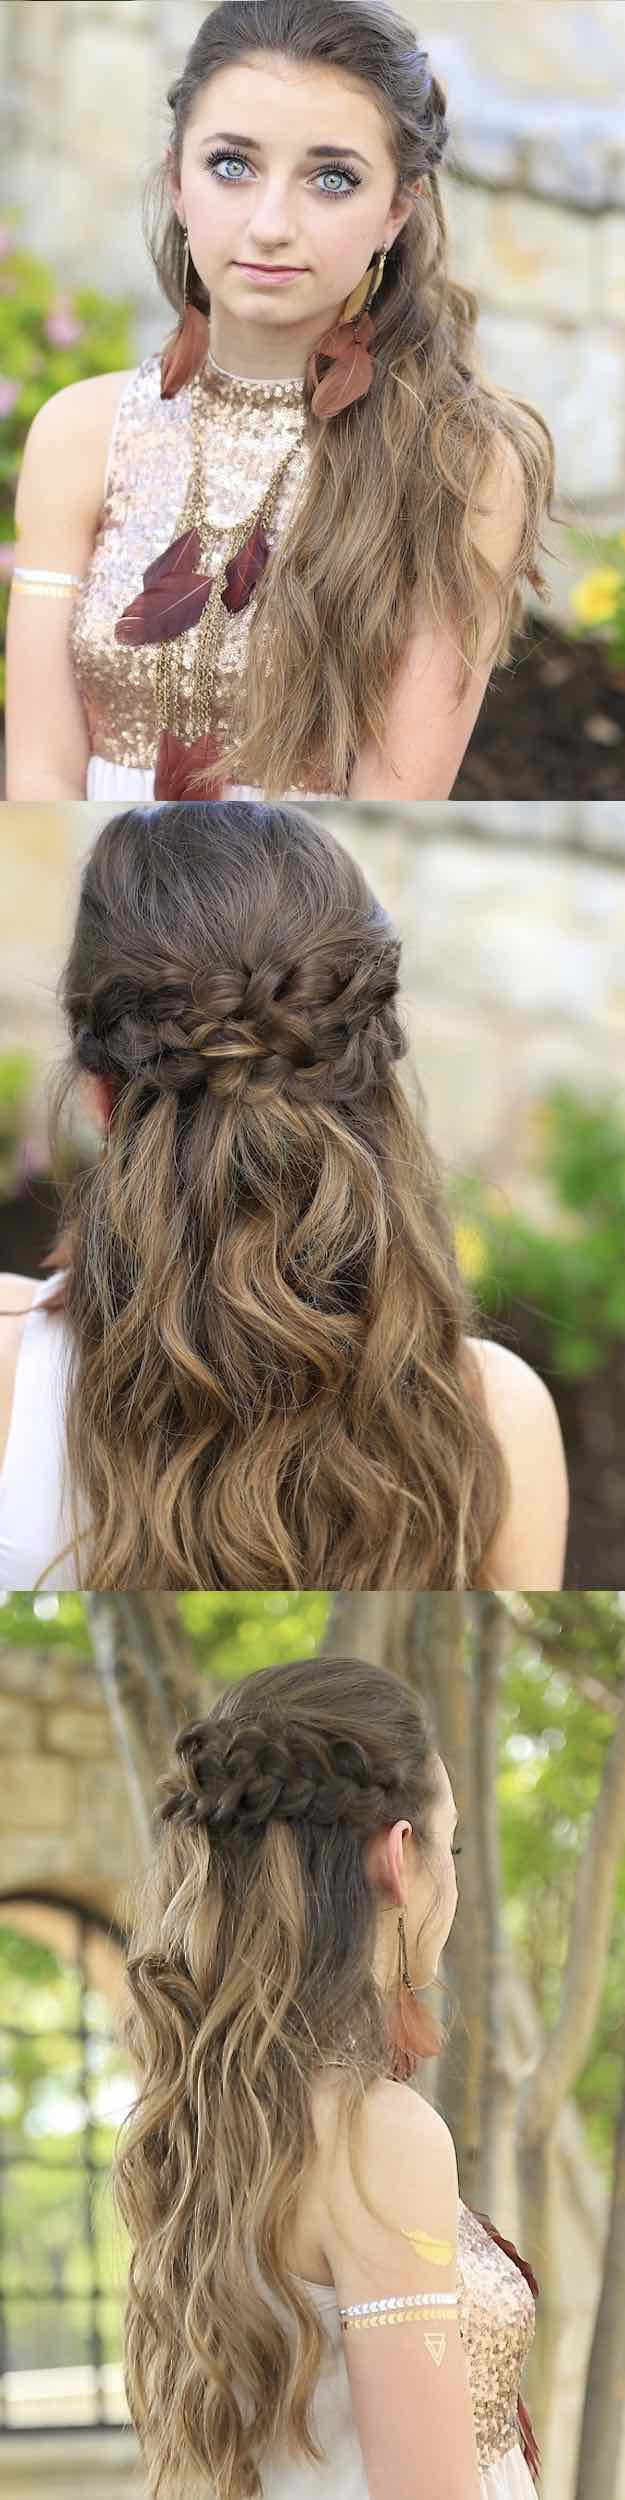 Prom Hairstyles Up
 25 Easy Half Up Half Down Hairstyle Tutorials For Prom